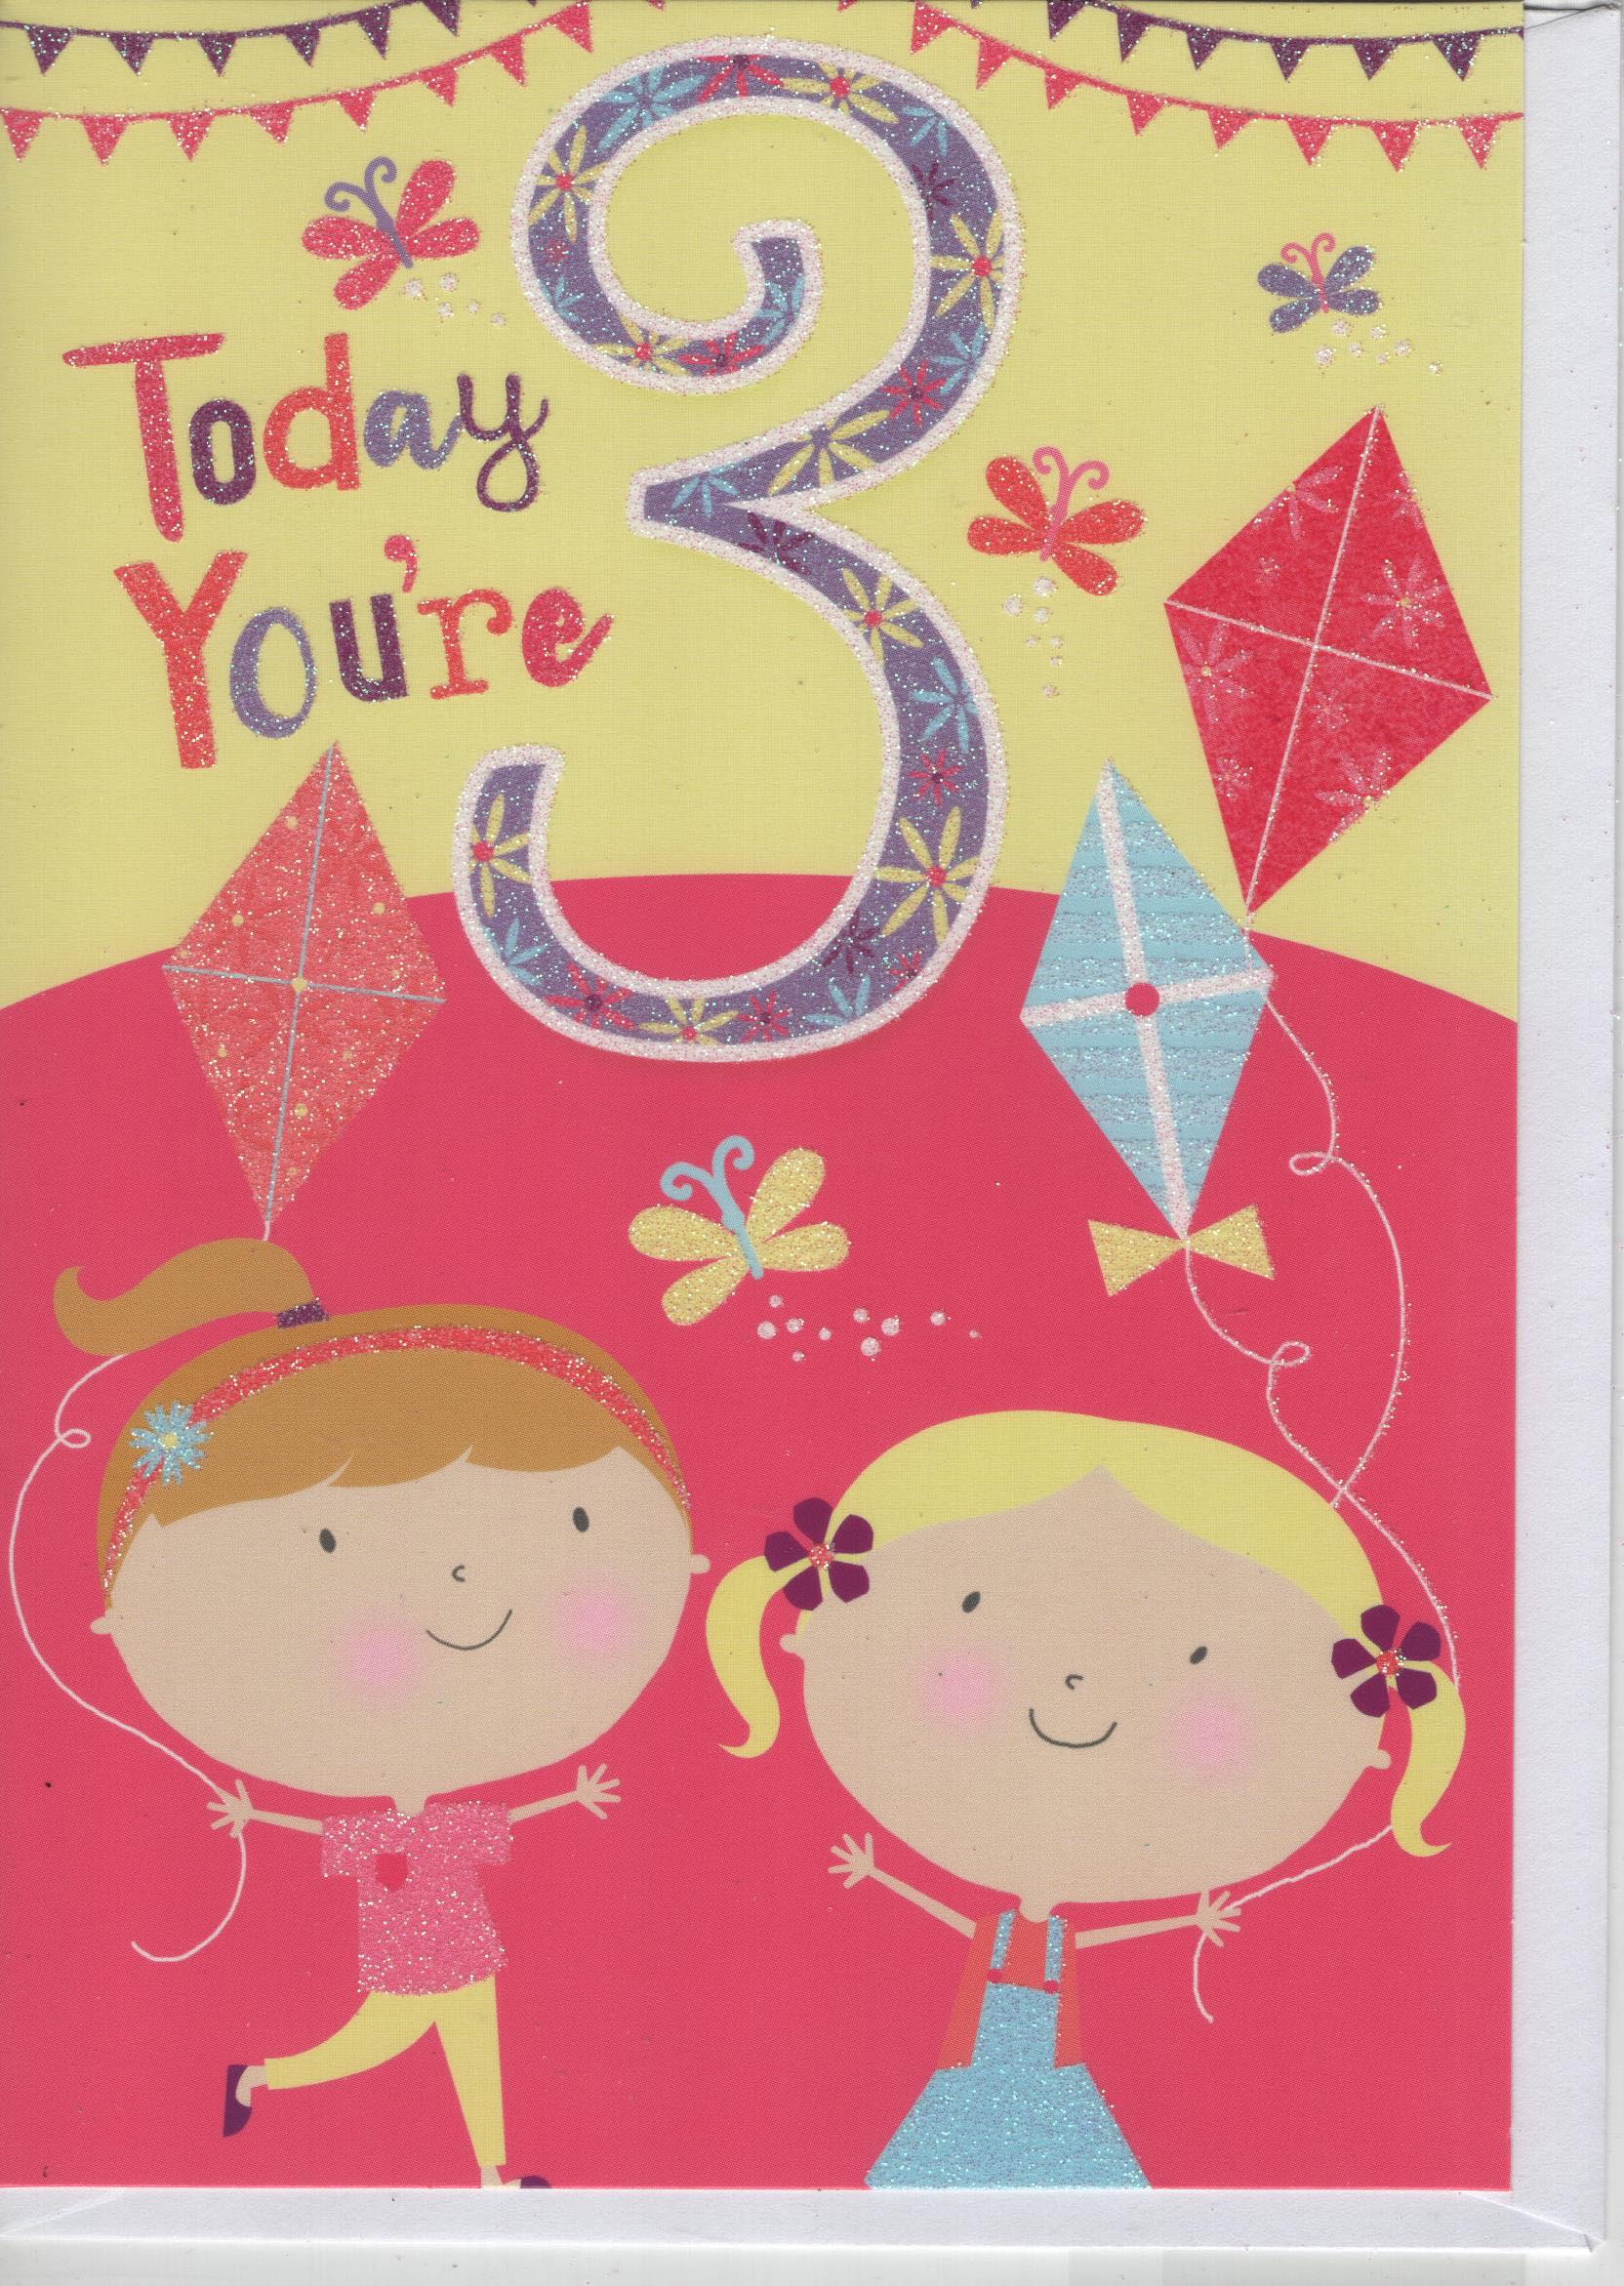 Today You're 3